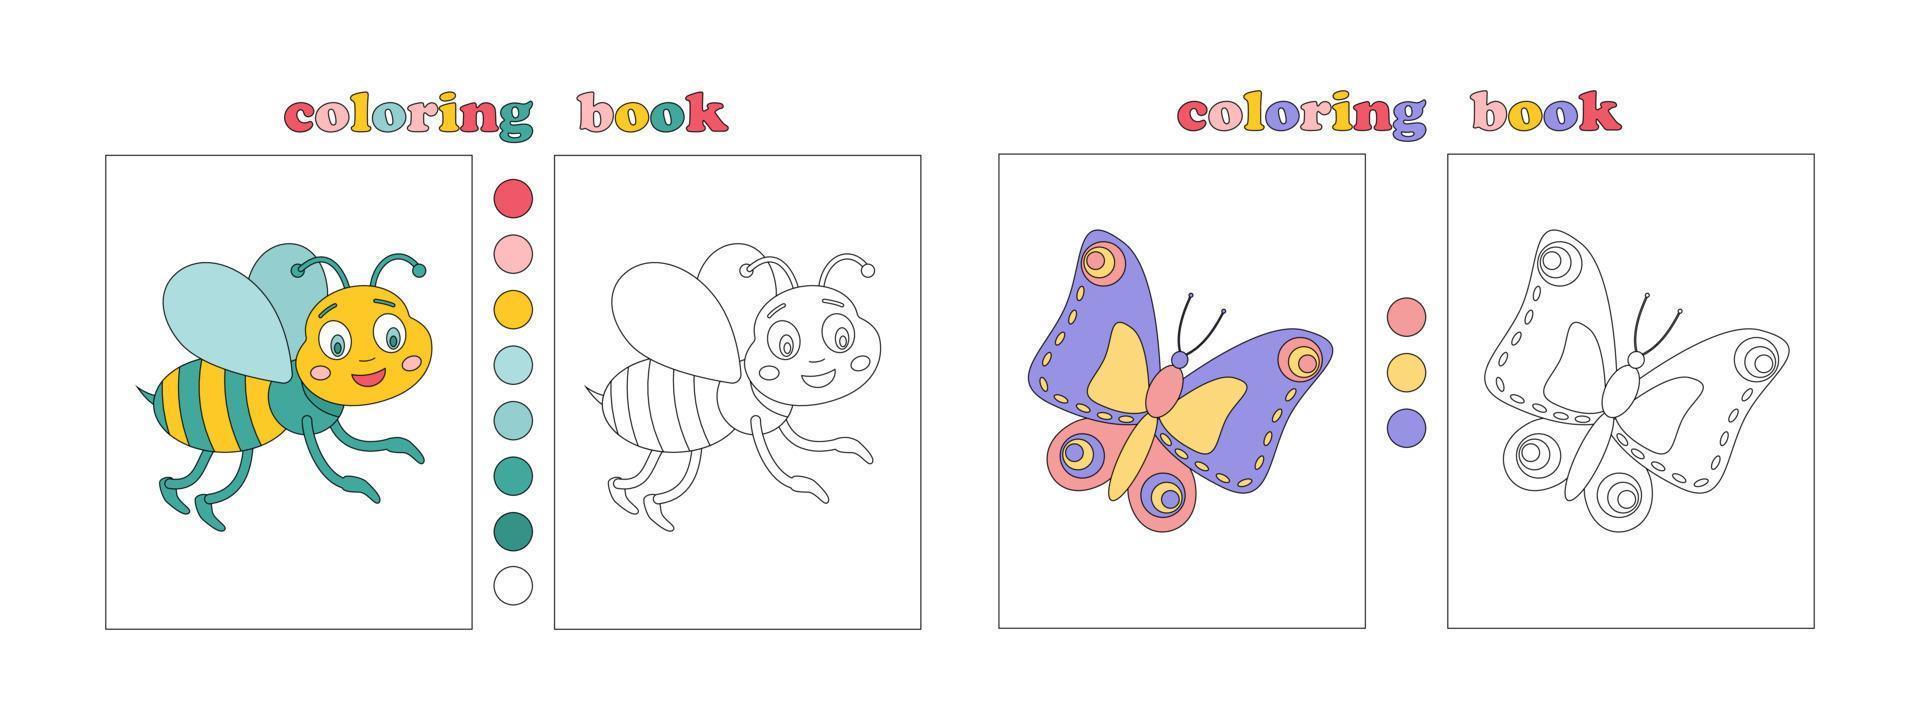 Coloring book page template for kids. Cute hand drawn characters for coloring. Butterfly, bee. Coloring book with flower samples for youngest. Children Education. Vector